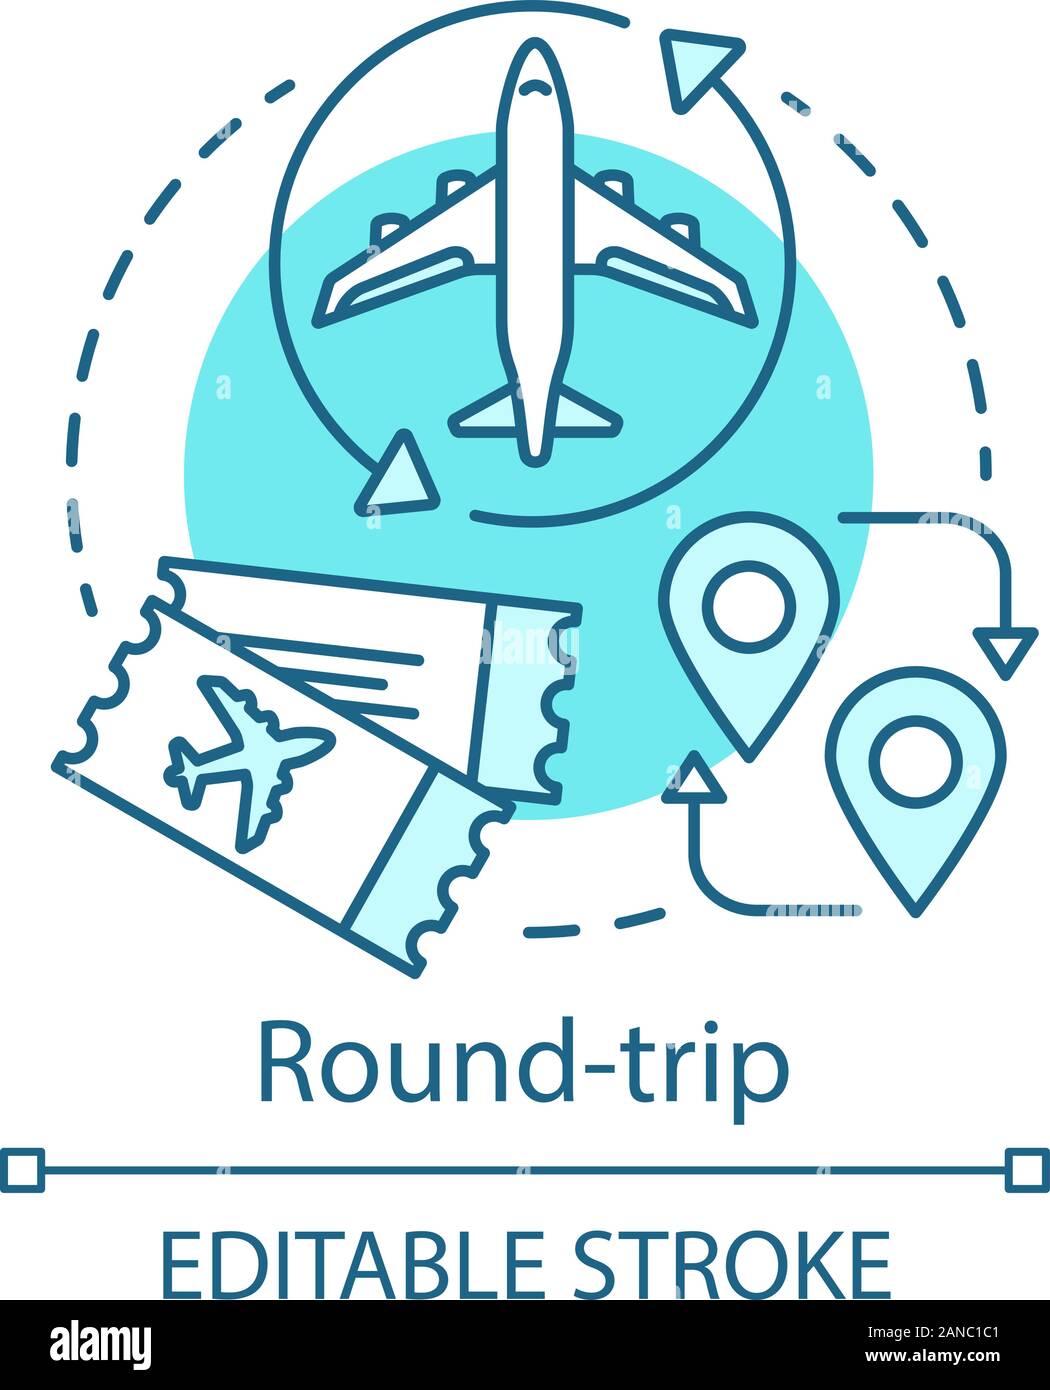 Round-trip concept icon. Return ticket idea thin line illustration.Travelling by plane, airplane trip. Aircraft flight path. Plane taking off, landing Stock Vector